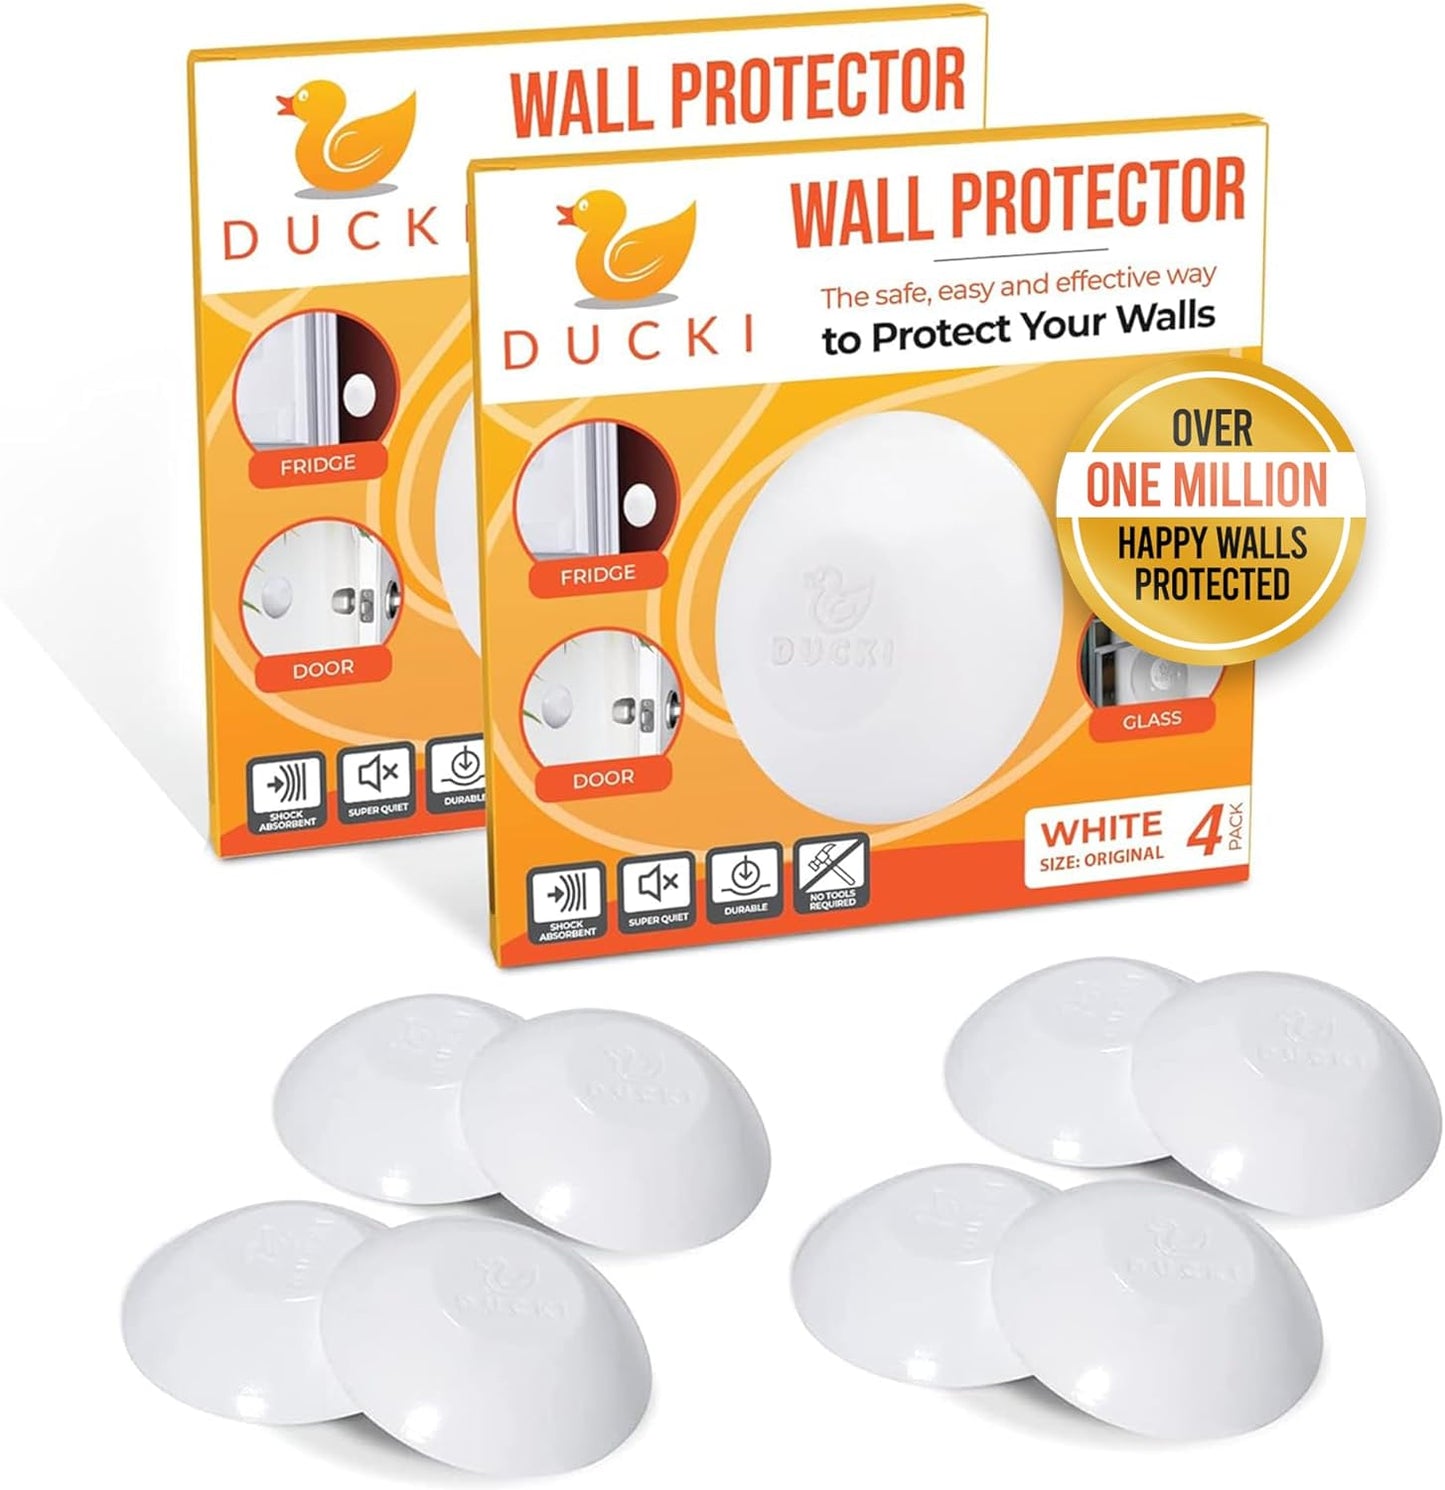 Wall Protectors - 4 Pack Clear Self Adhesive, Reusable Solution for Stopping Damage & Noise from Doors, Refrigerators More in Your Home or Office Durable, Shock Absorbent Discreet